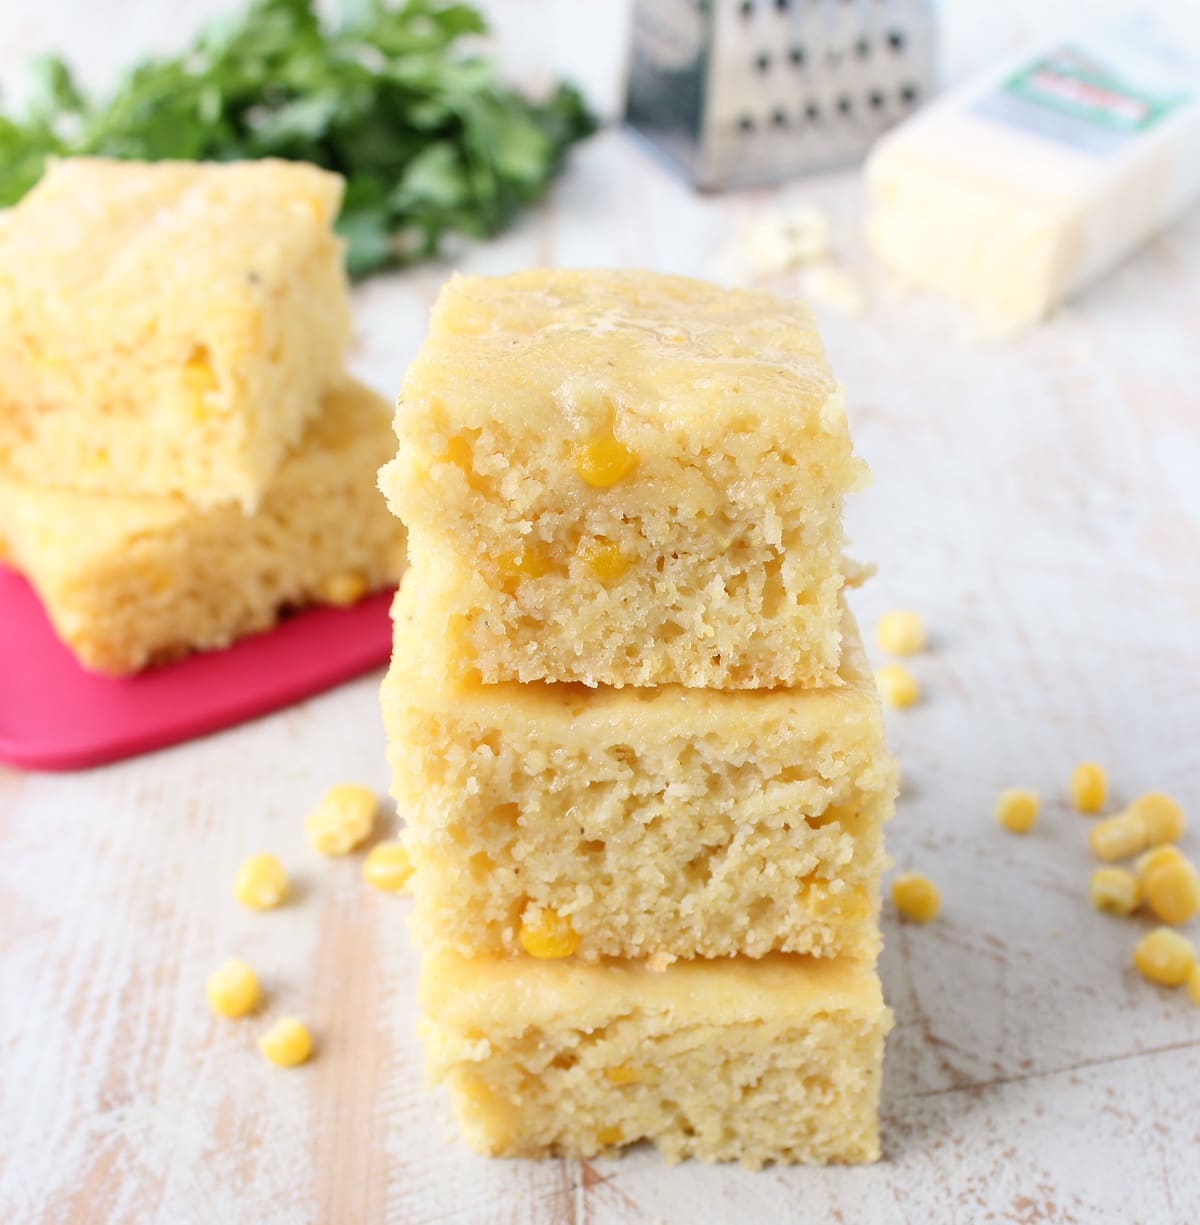 This slow cooker cornbread recipe makes preparing cornbread easy without the use of an oven, and it only takes 10 minutes to prep!